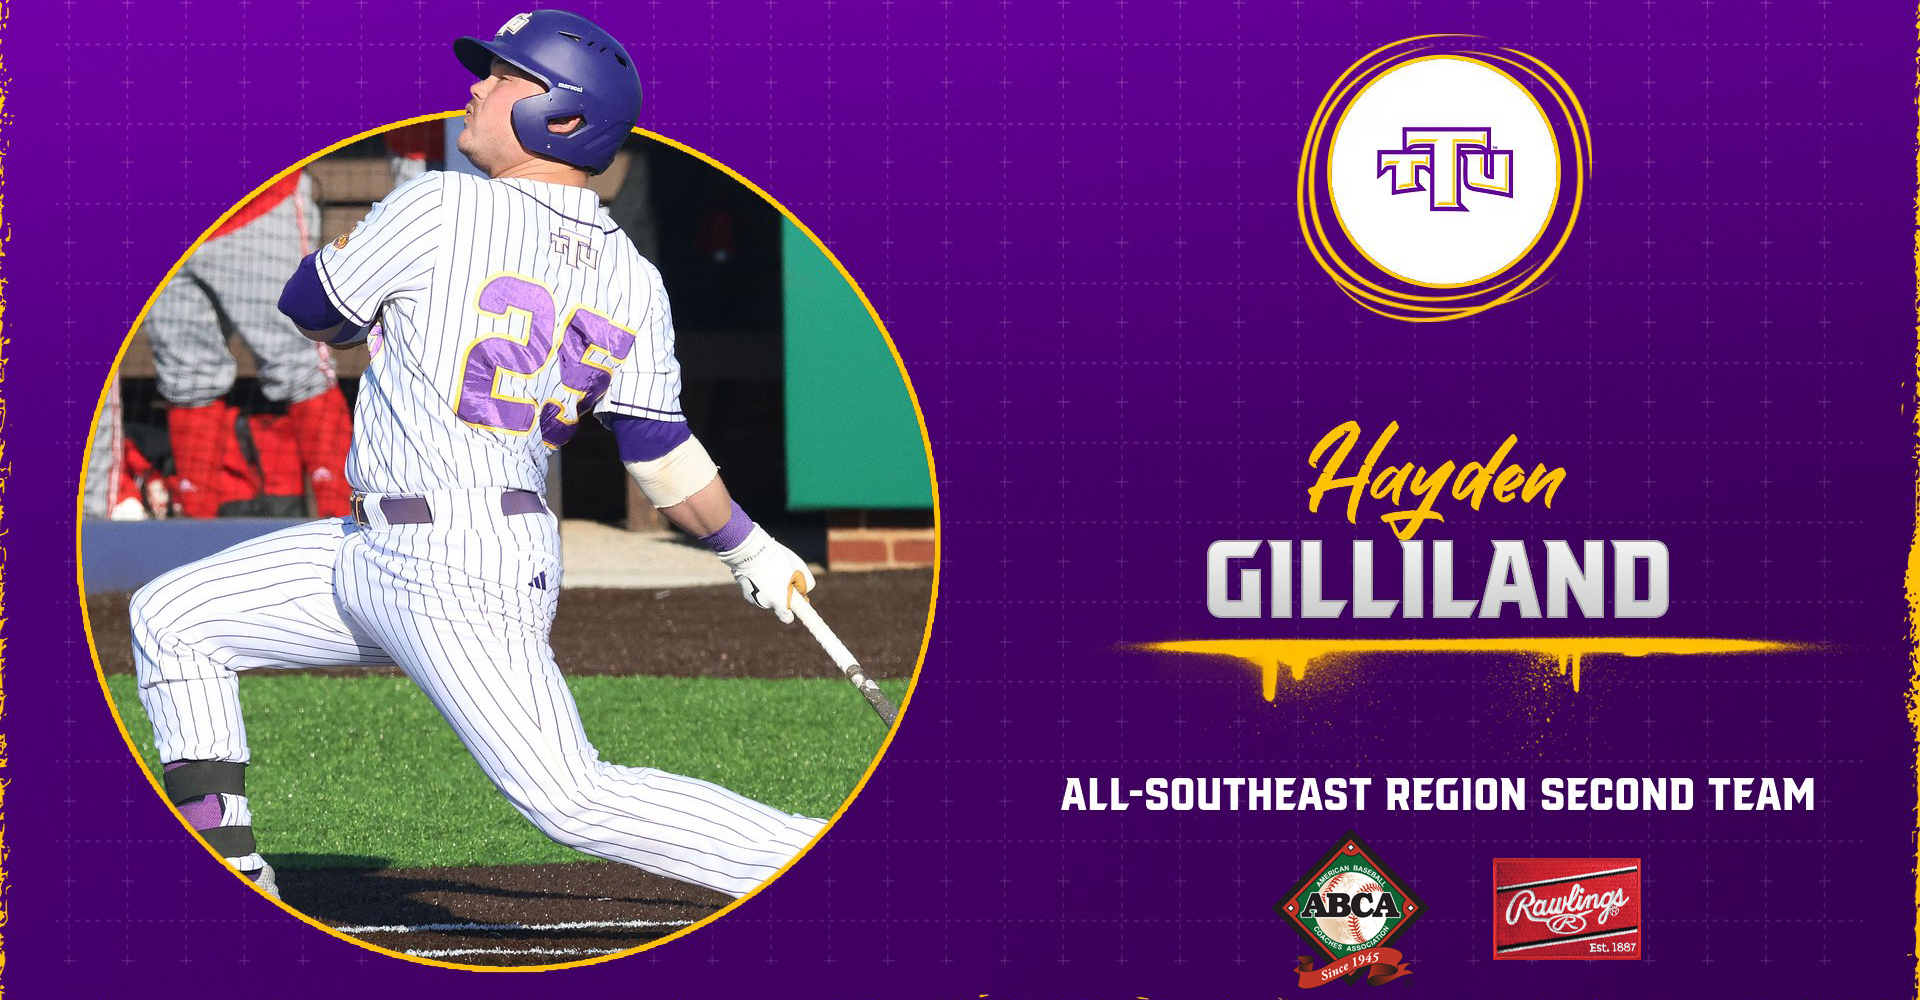 Gilliland named to ABCA/Rawlings All-Southeast Region Second Team